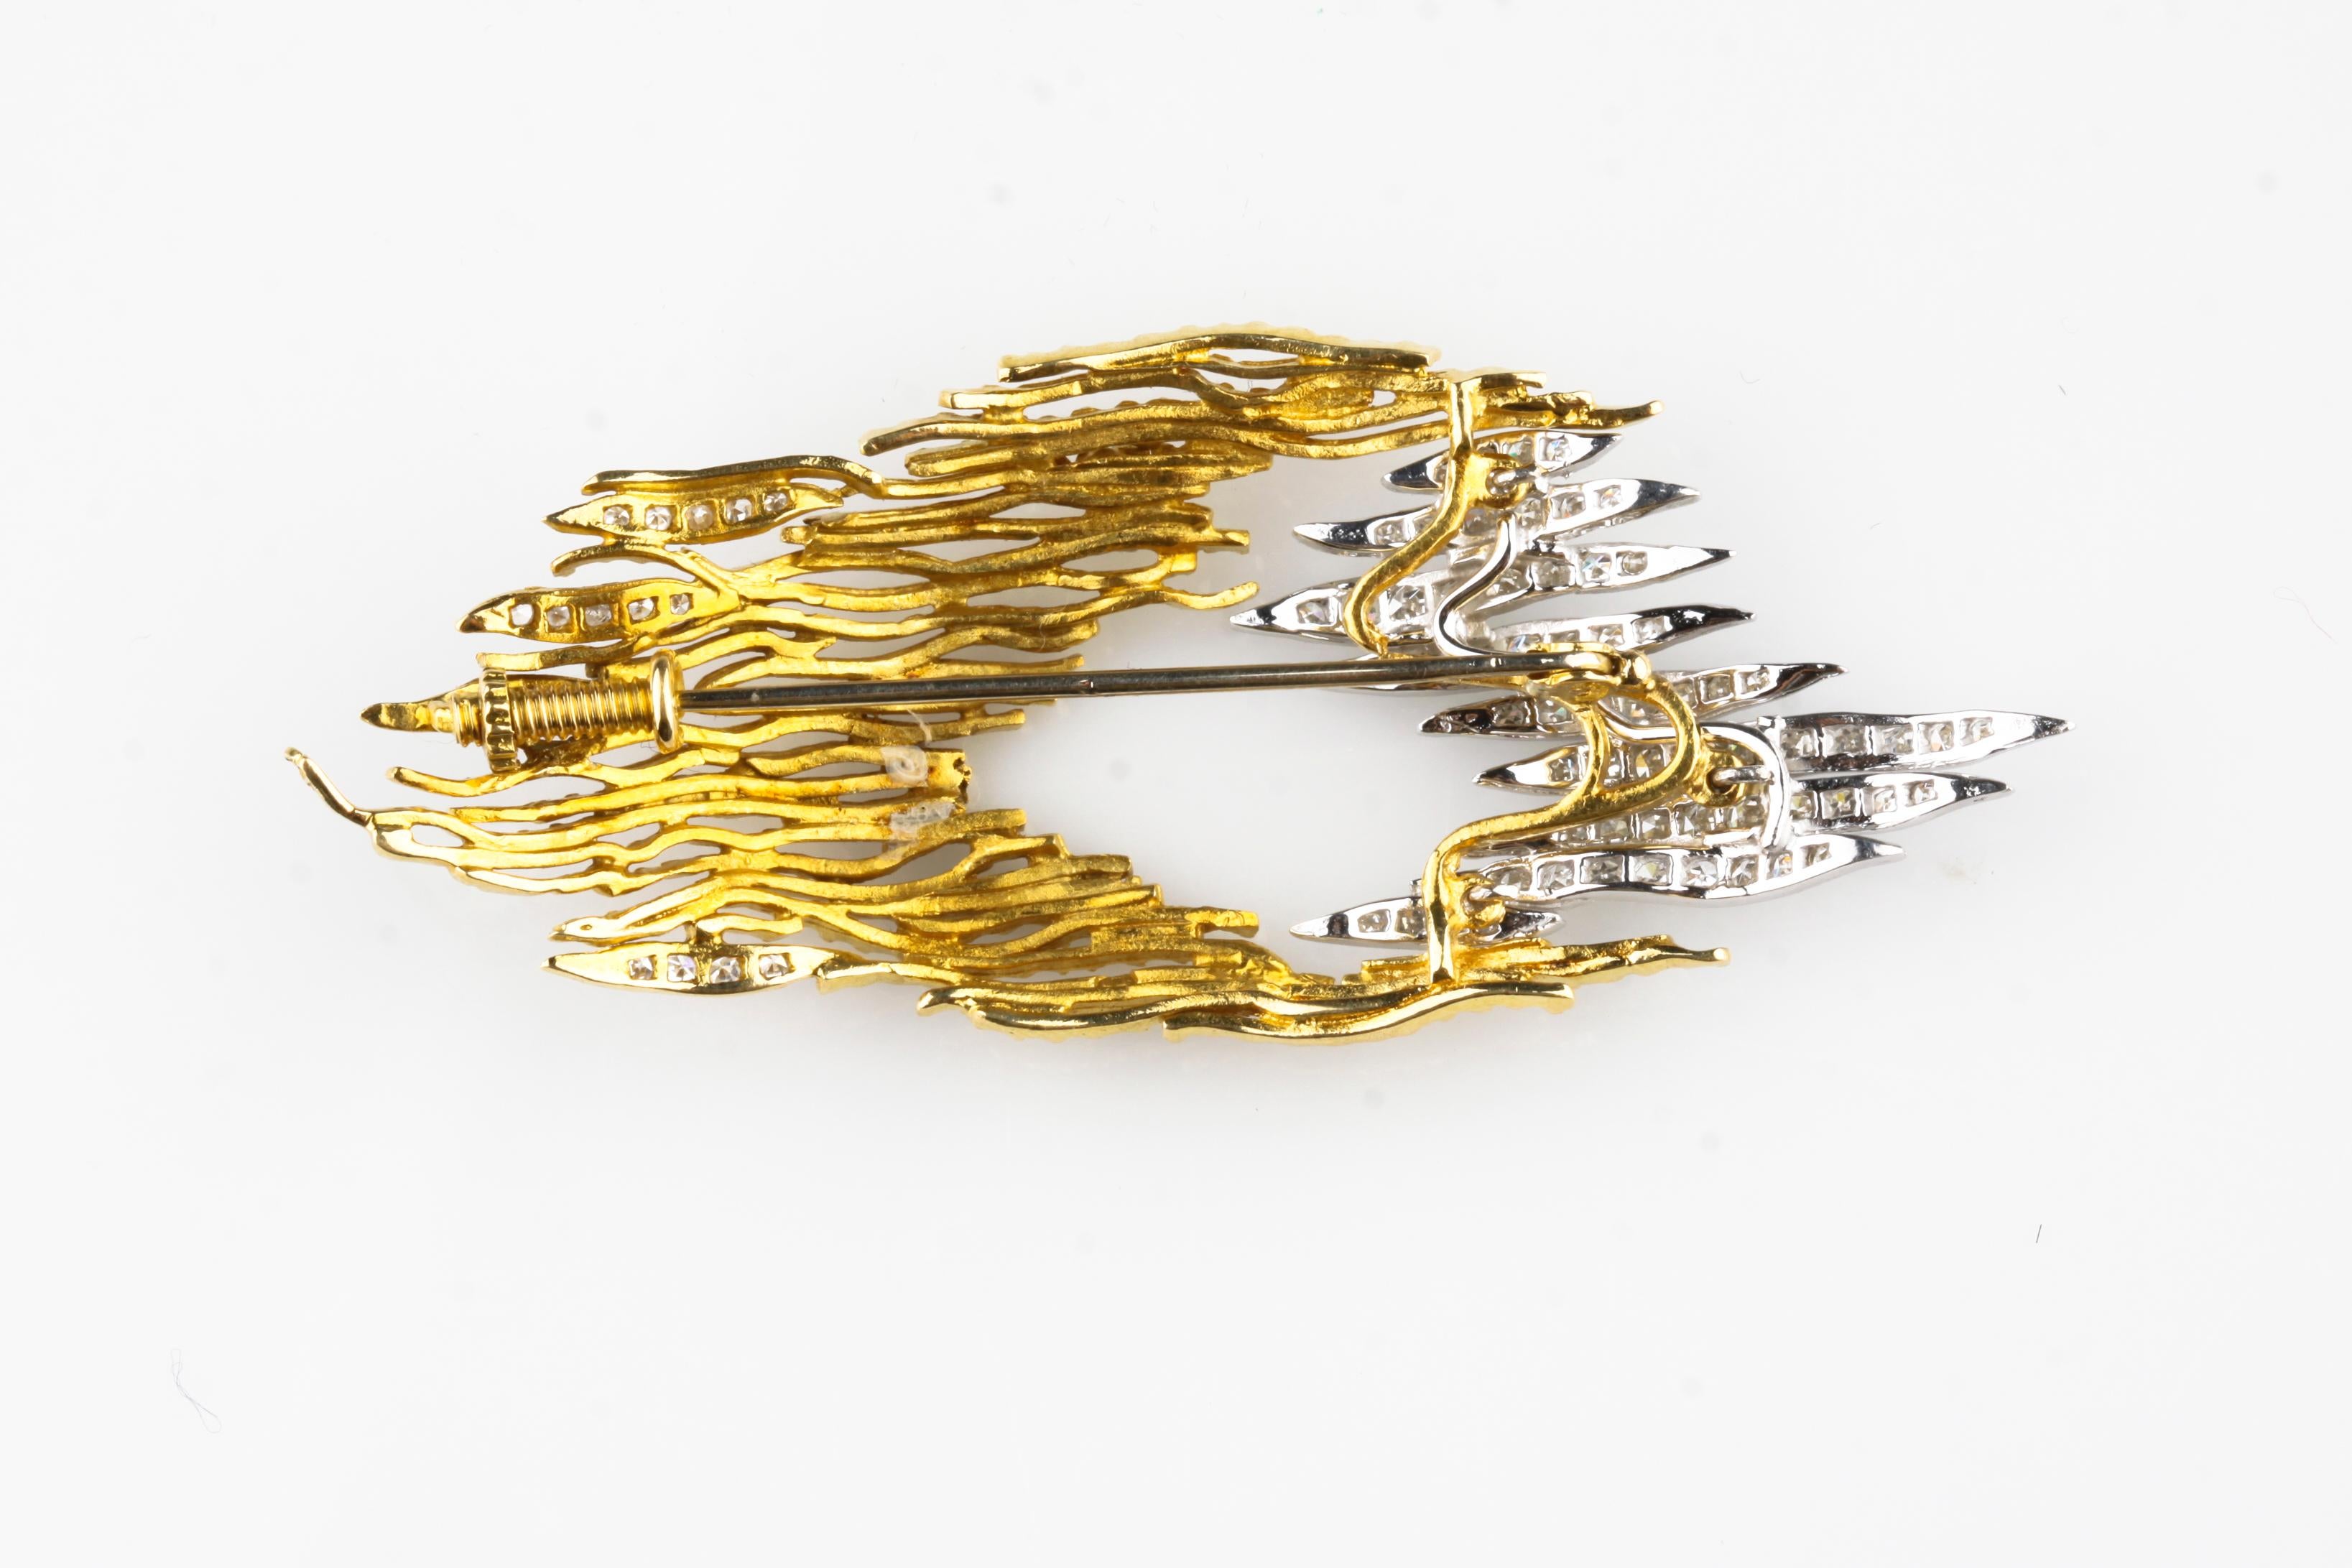 Modern 1.80 Carat Diamond Brooch and Earring Set in Yellow Gold and Platinum, 1960s For Sale